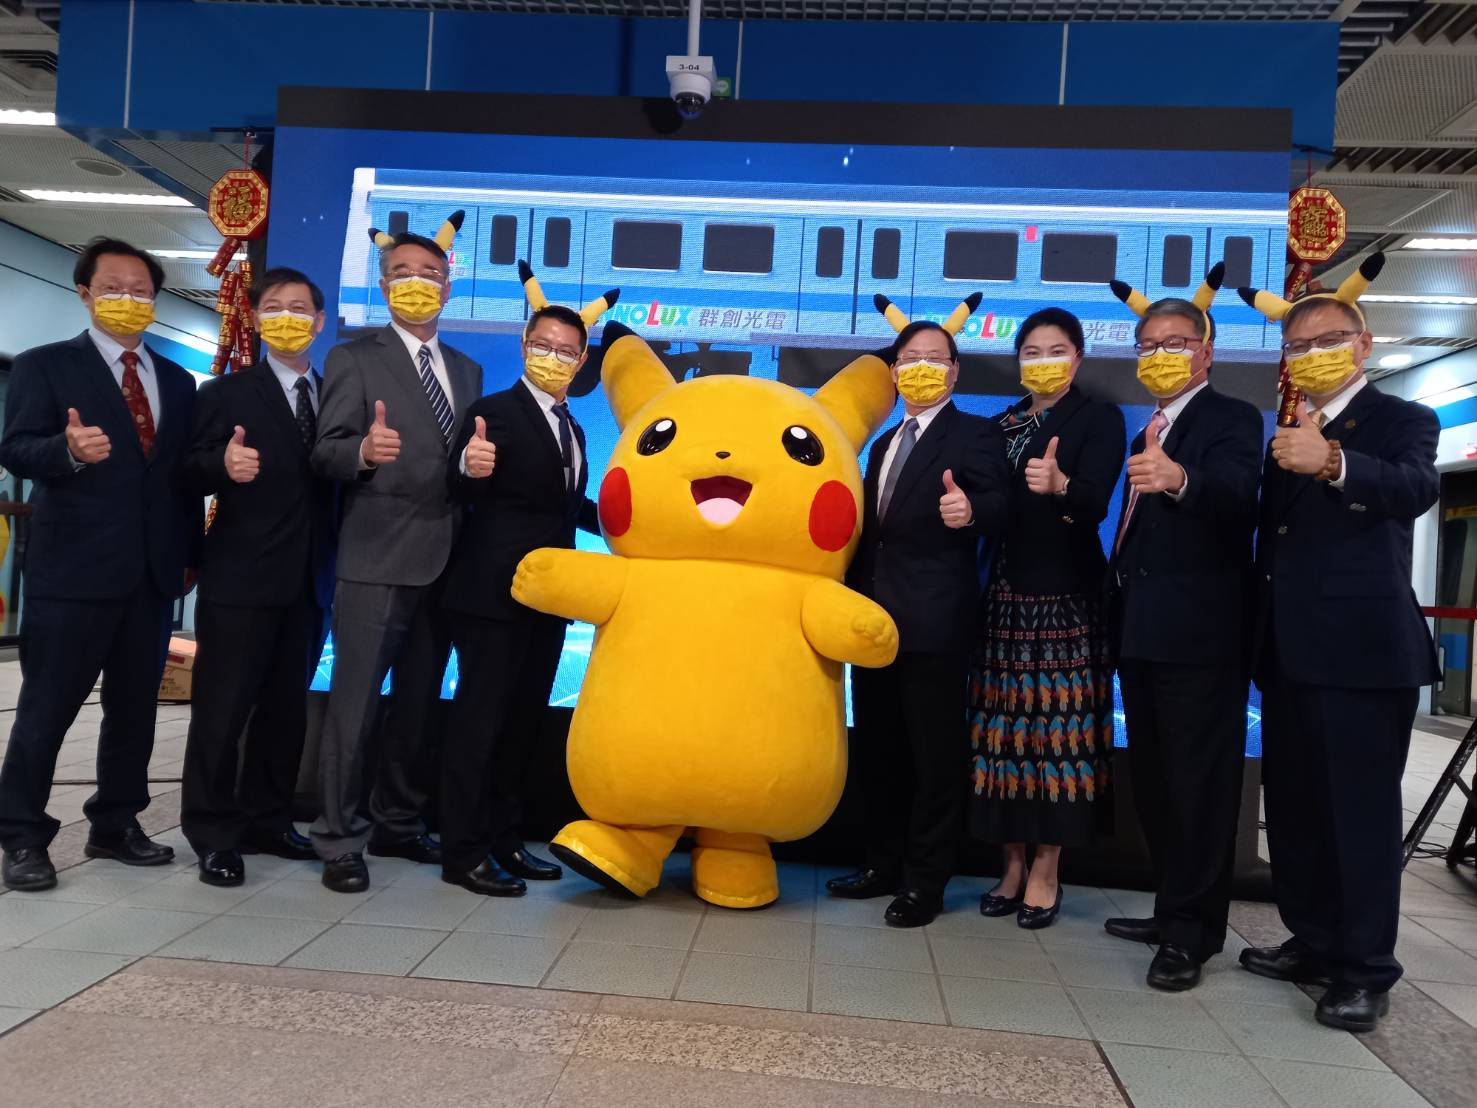 Taipei Rapid Transit Corporation launched Pokemon MRT Train with mart panel and displays. (Photo / Provided by Taipei City Government)